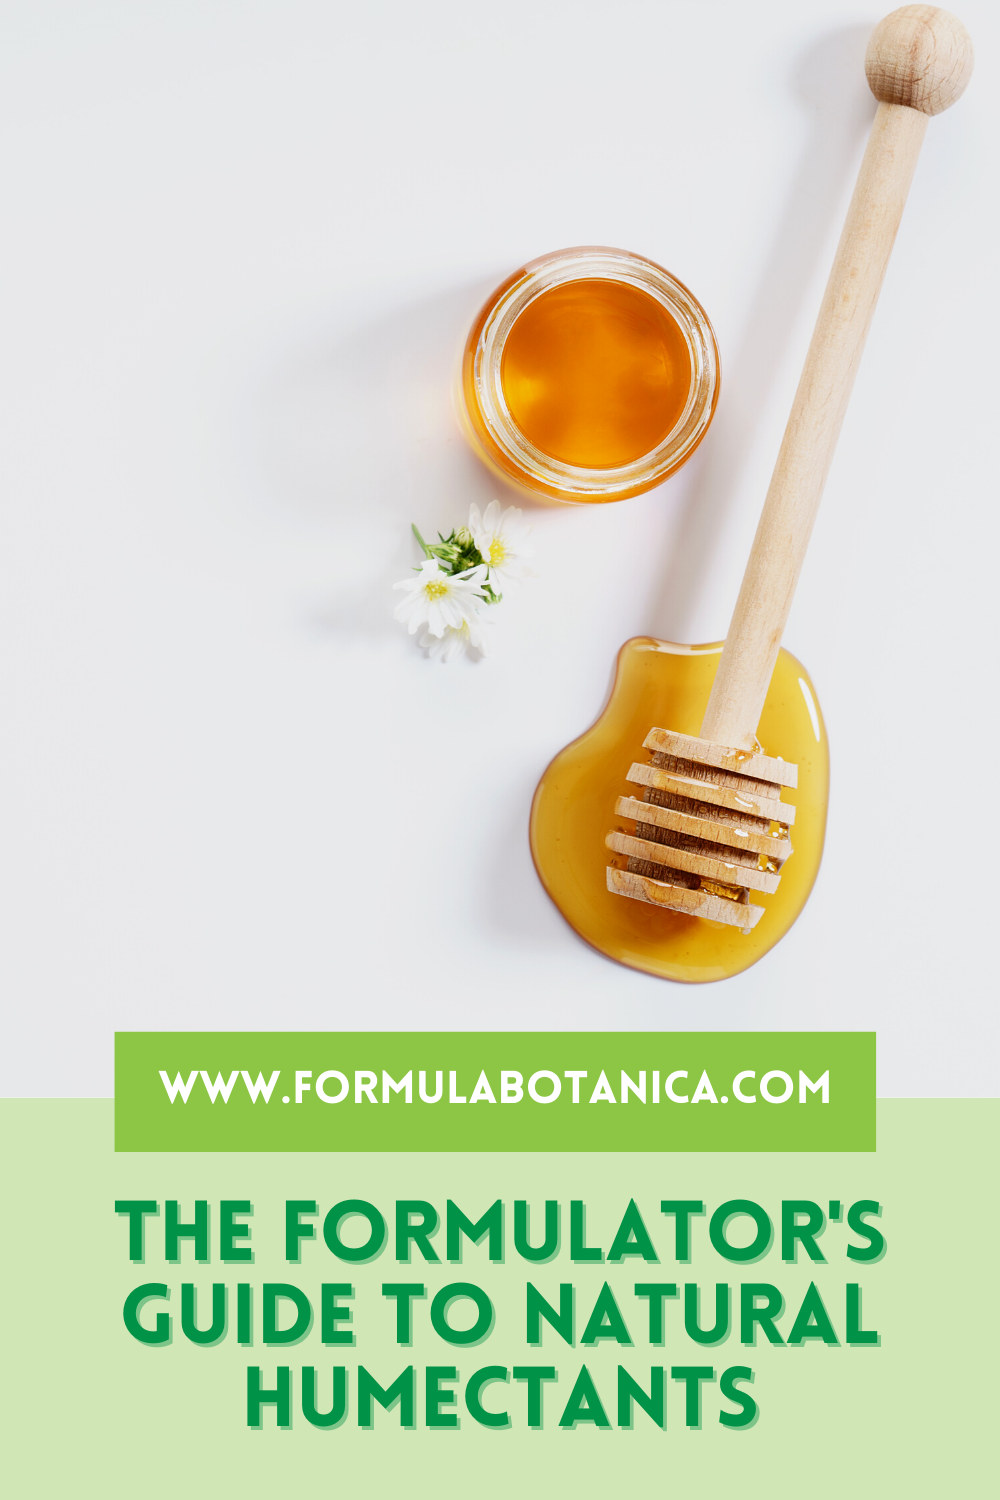 The Formulator's Guide to Natural Humectants